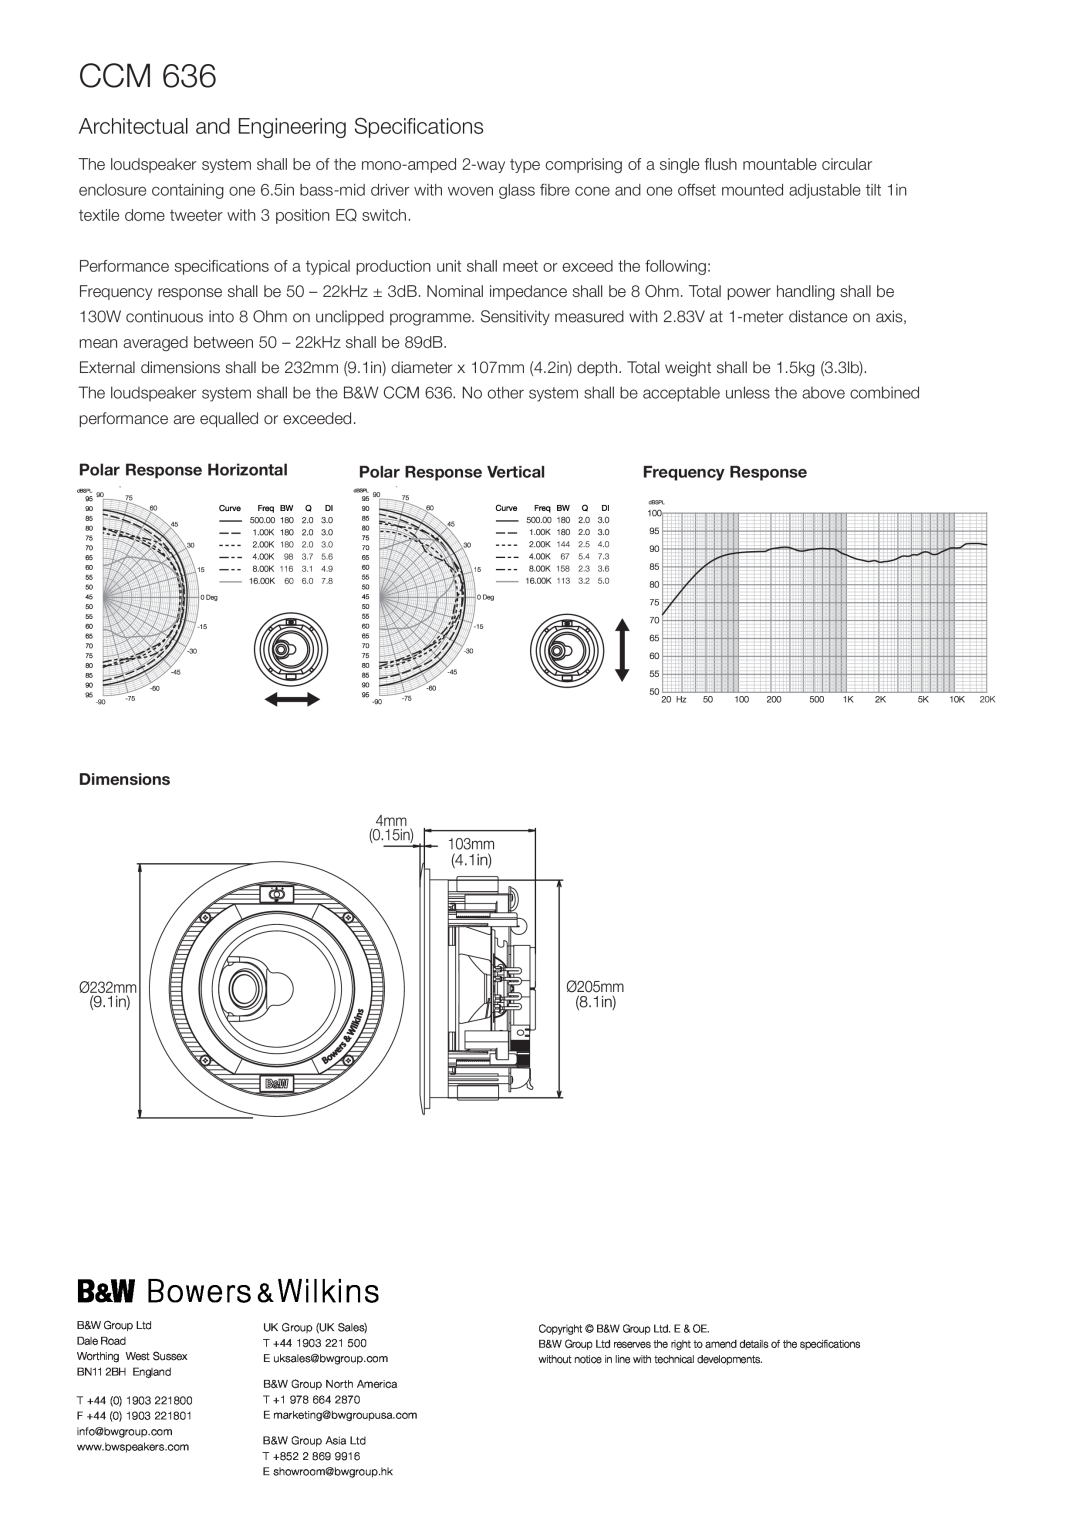 Bowers & Wilkins CCM 636 Architectual and Engineering Specifications, Polar Response Horizontal, Polar Response Vertical 